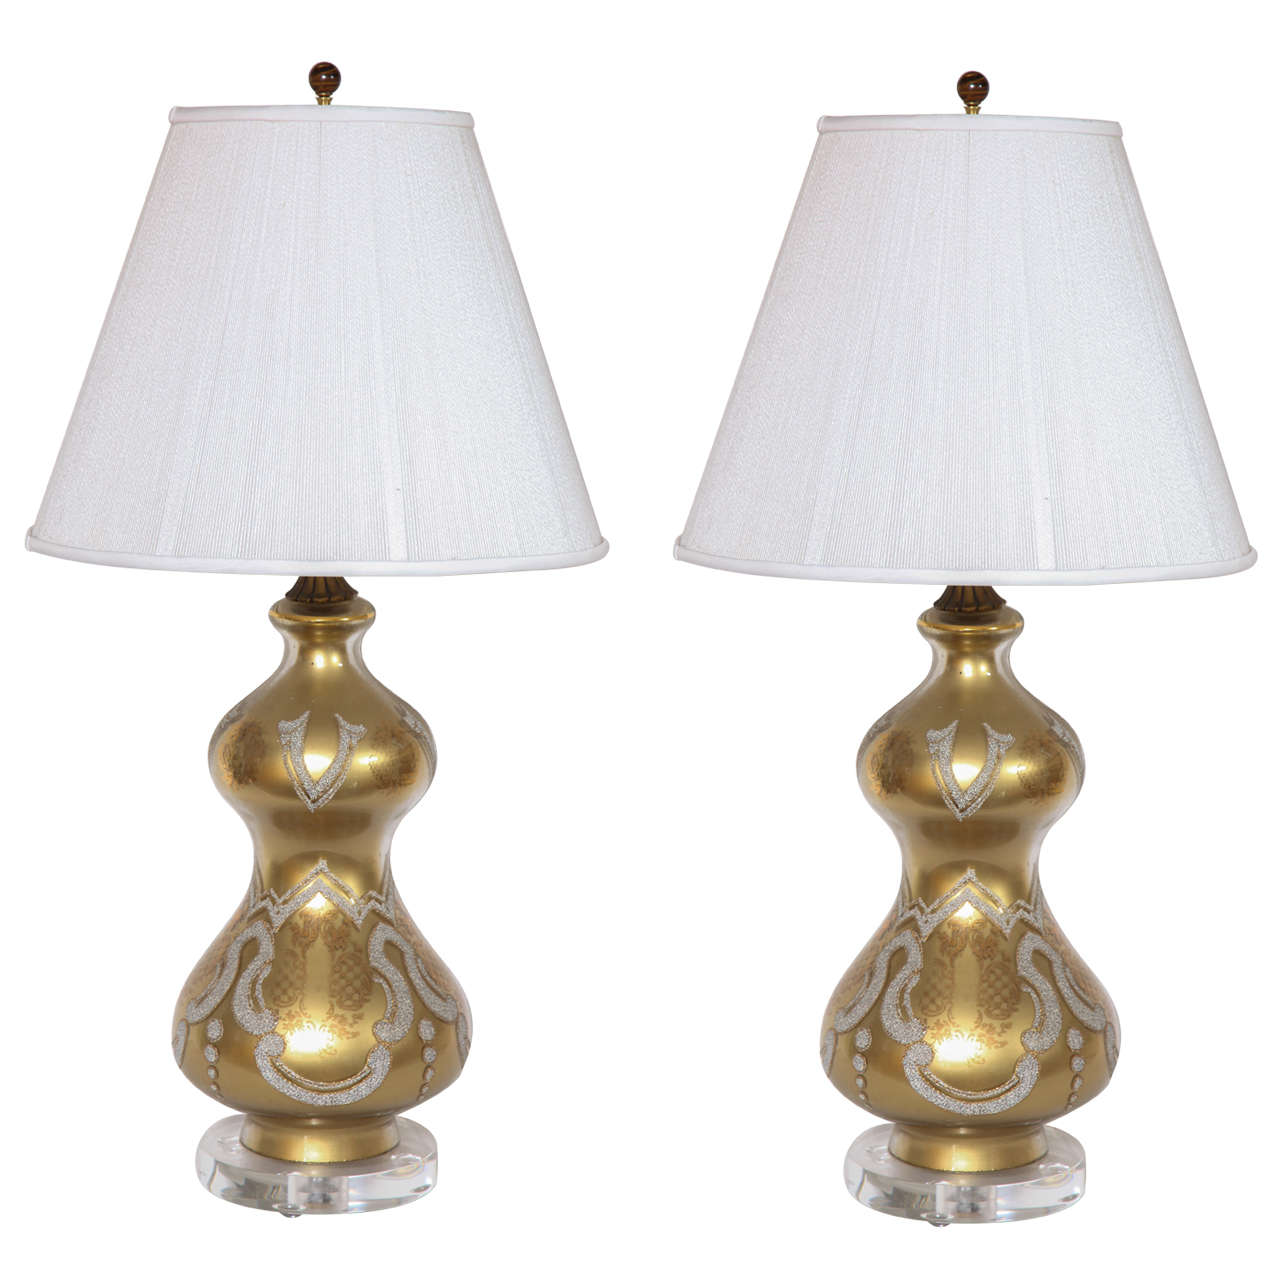 Gold Eglomise Lamps with Stippled Design